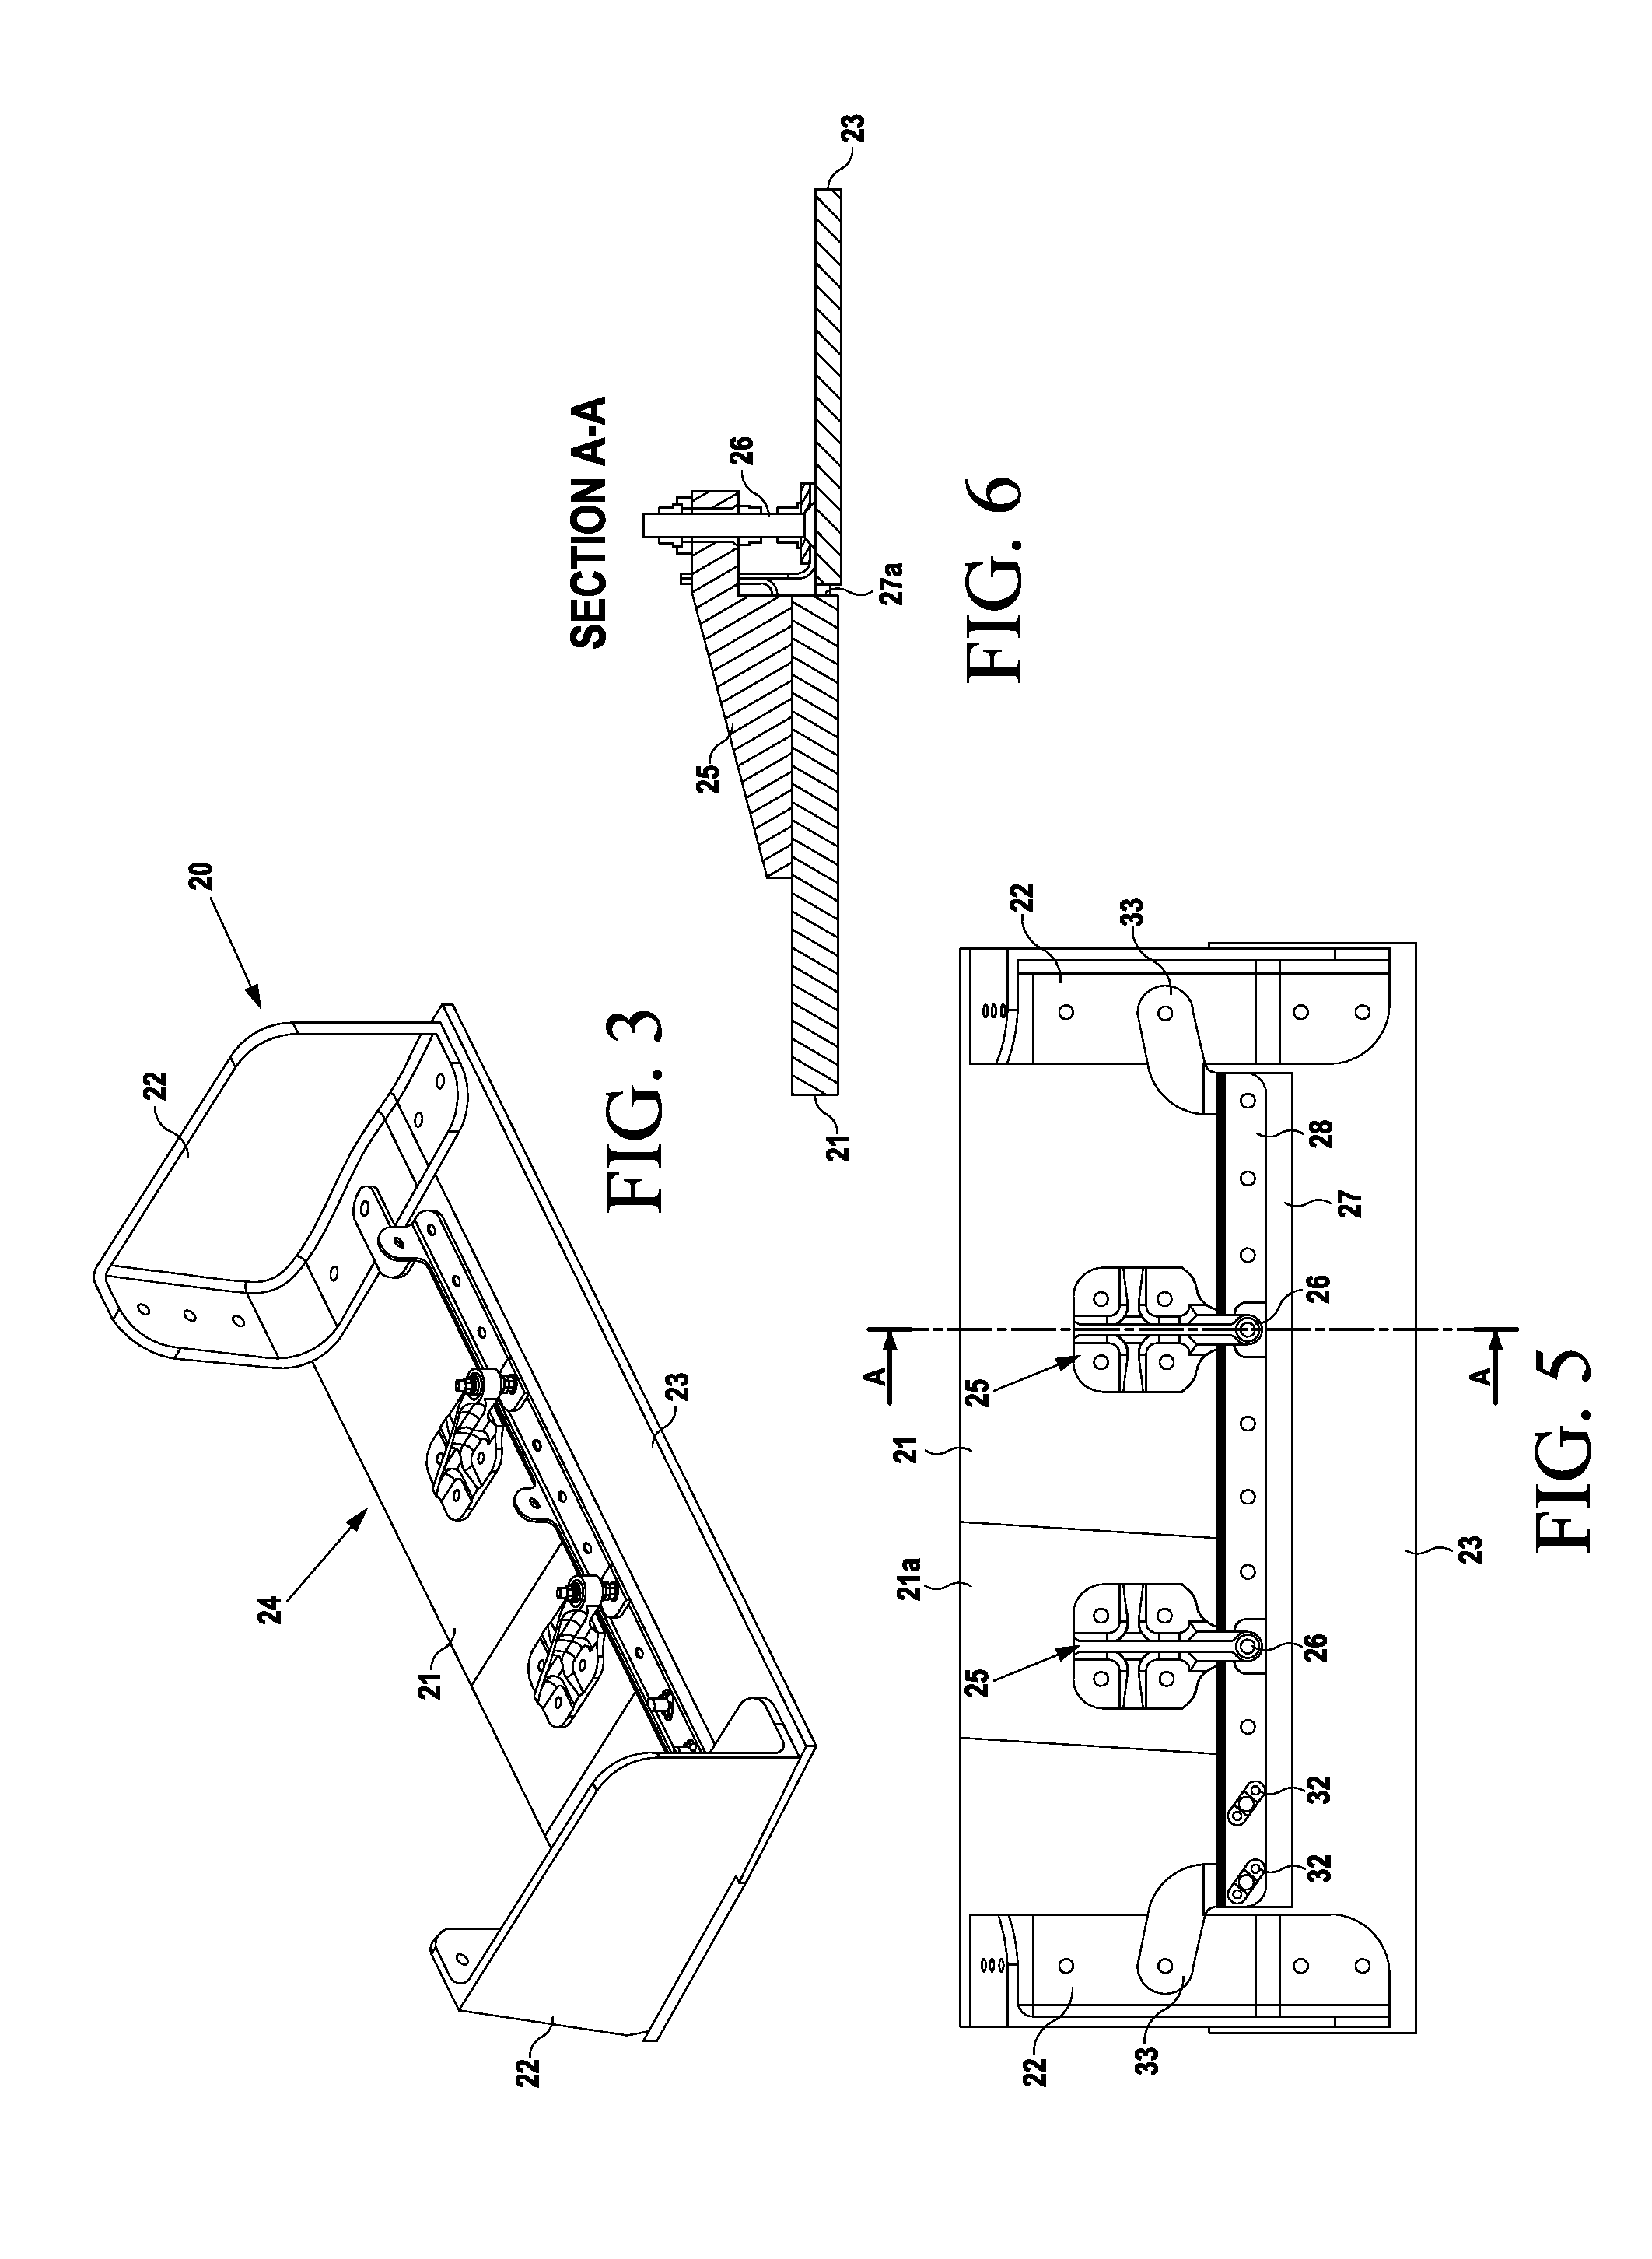 Coupling assembly